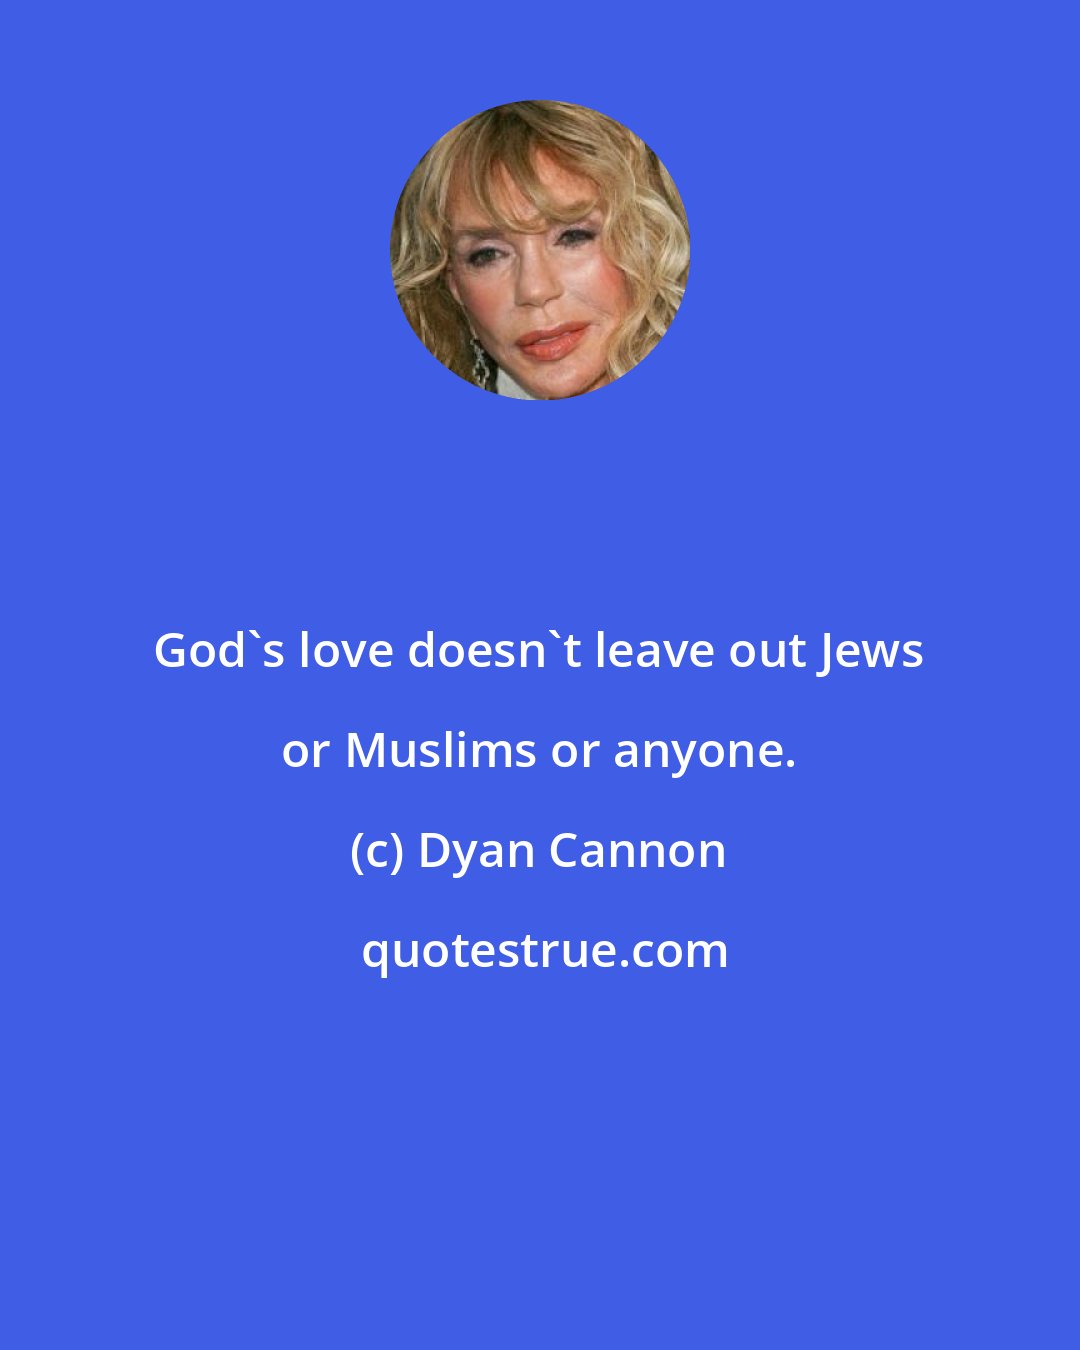 Dyan Cannon: God's love doesn't leave out Jews or Muslims or anyone.